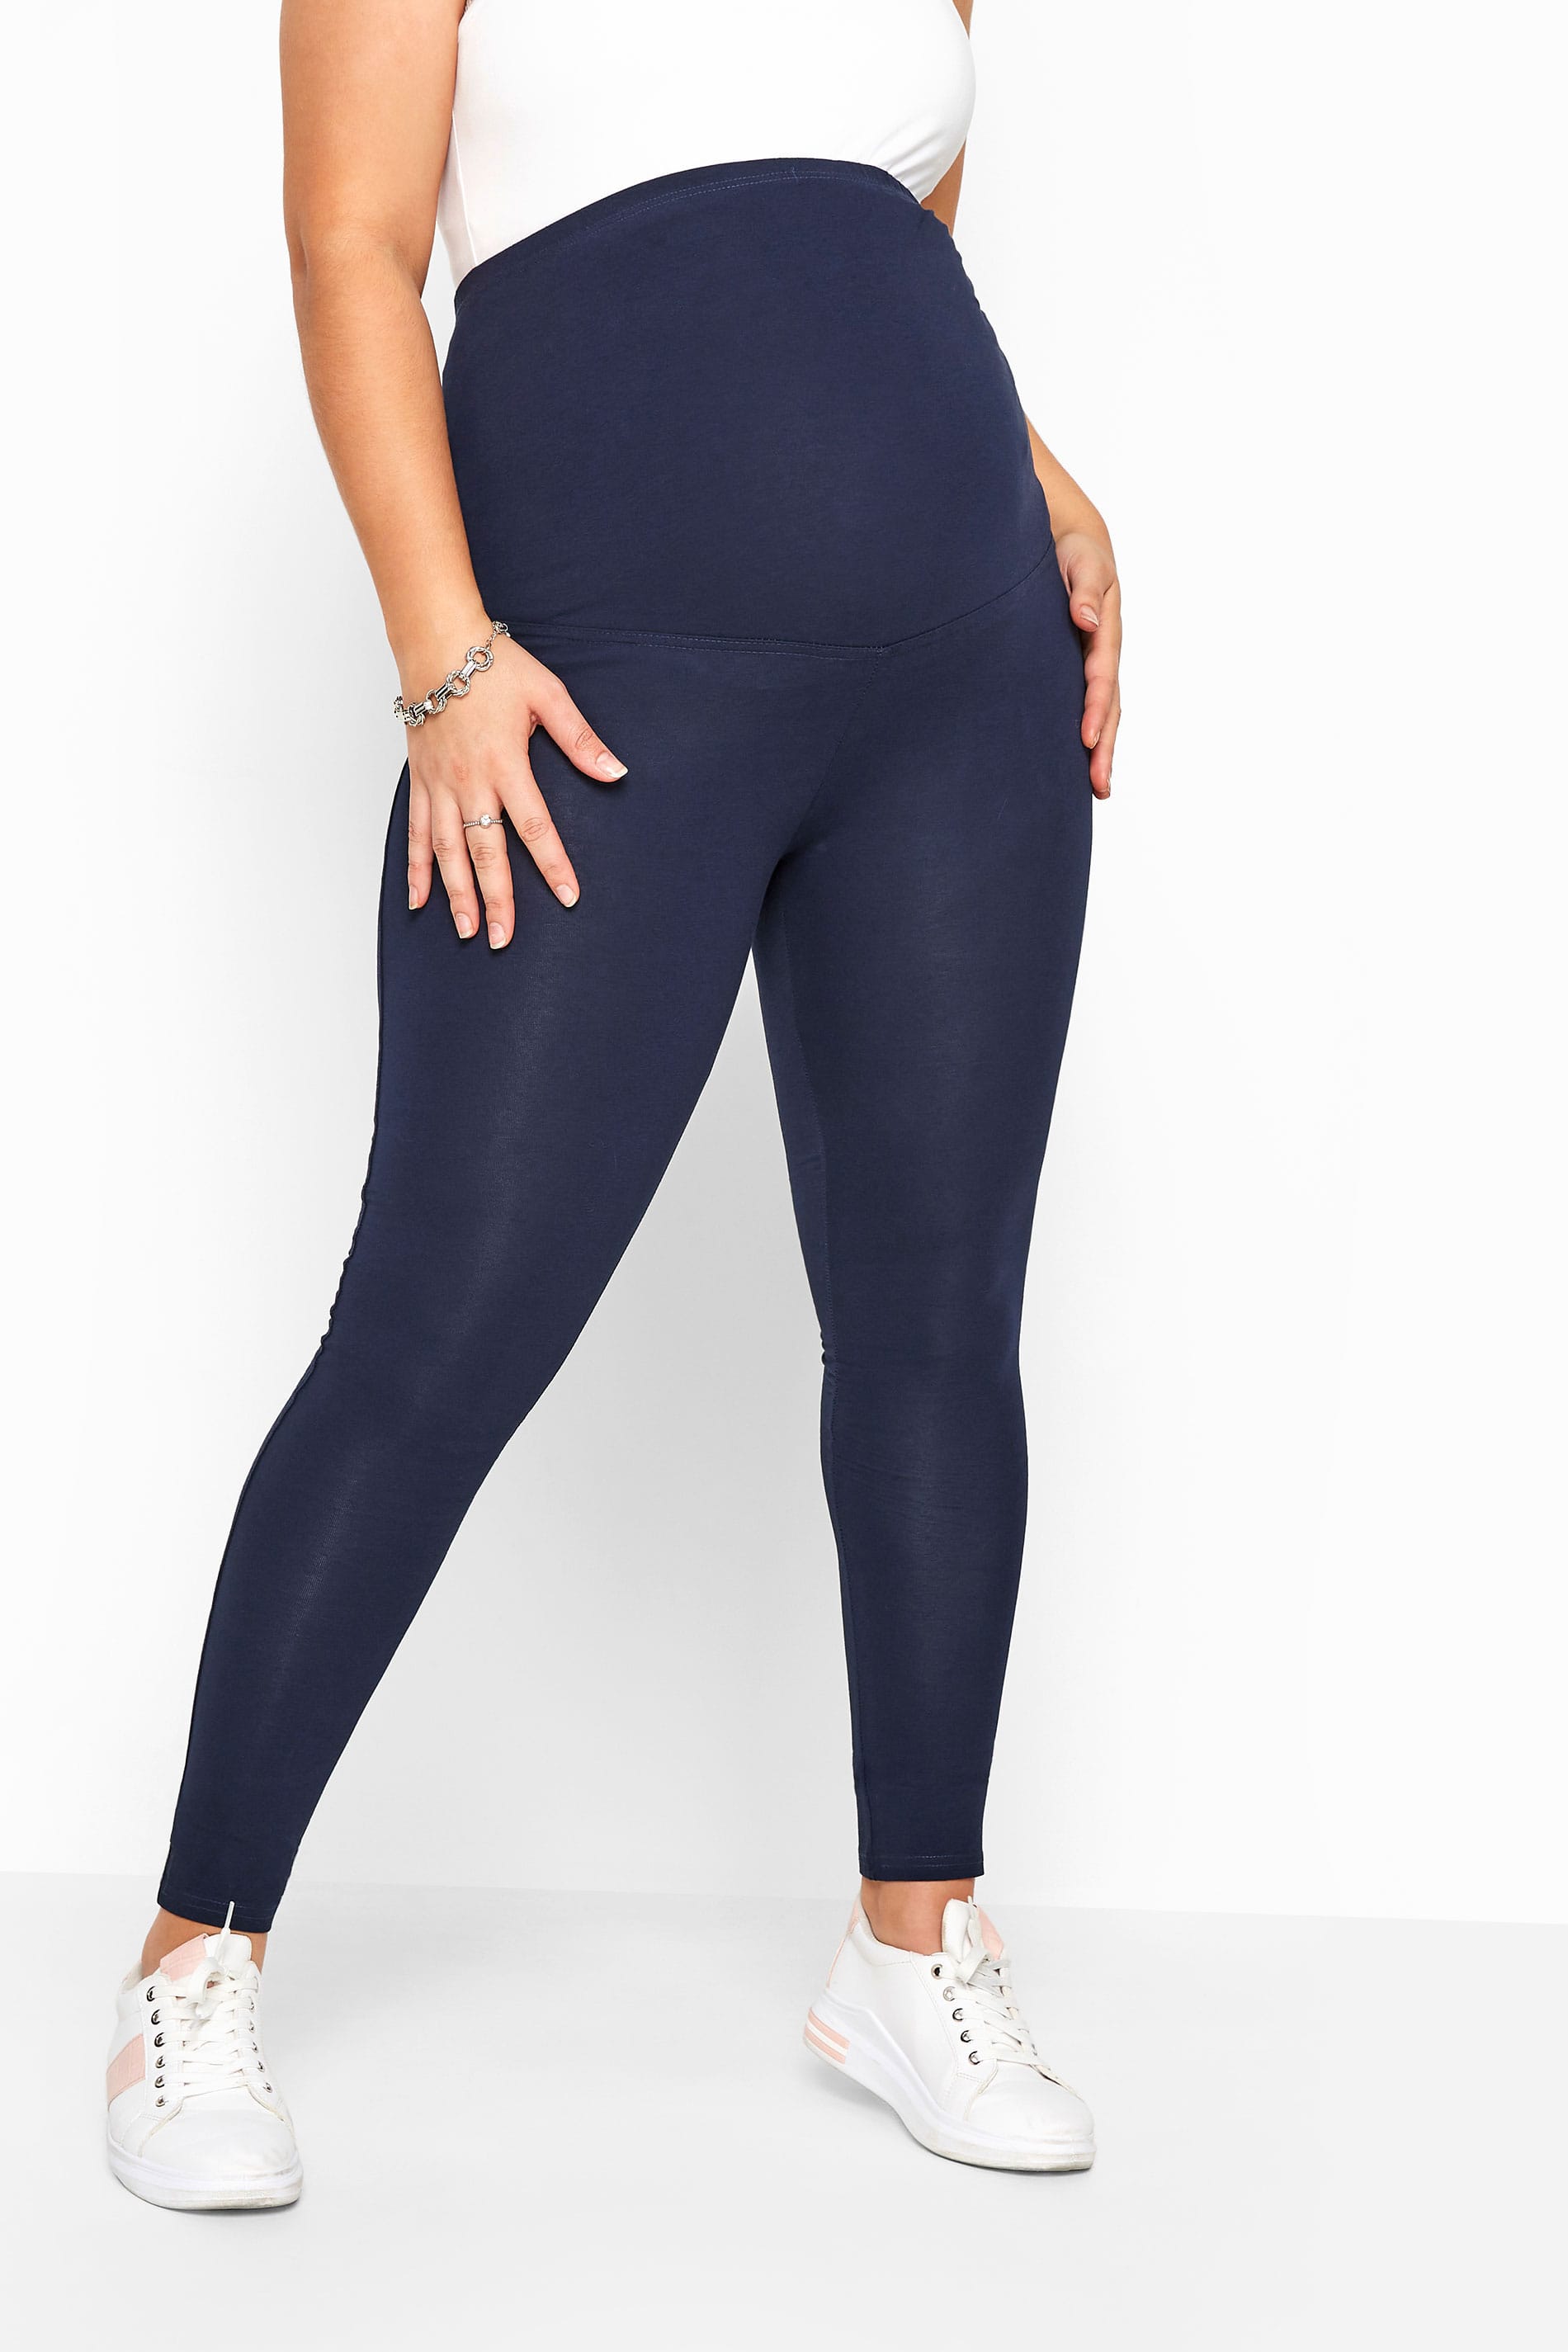 BUMP IT UP MATERNITY Navy Blue Cotton Essential Leggings With Comfort Panel Plus Size 16 to 32 1